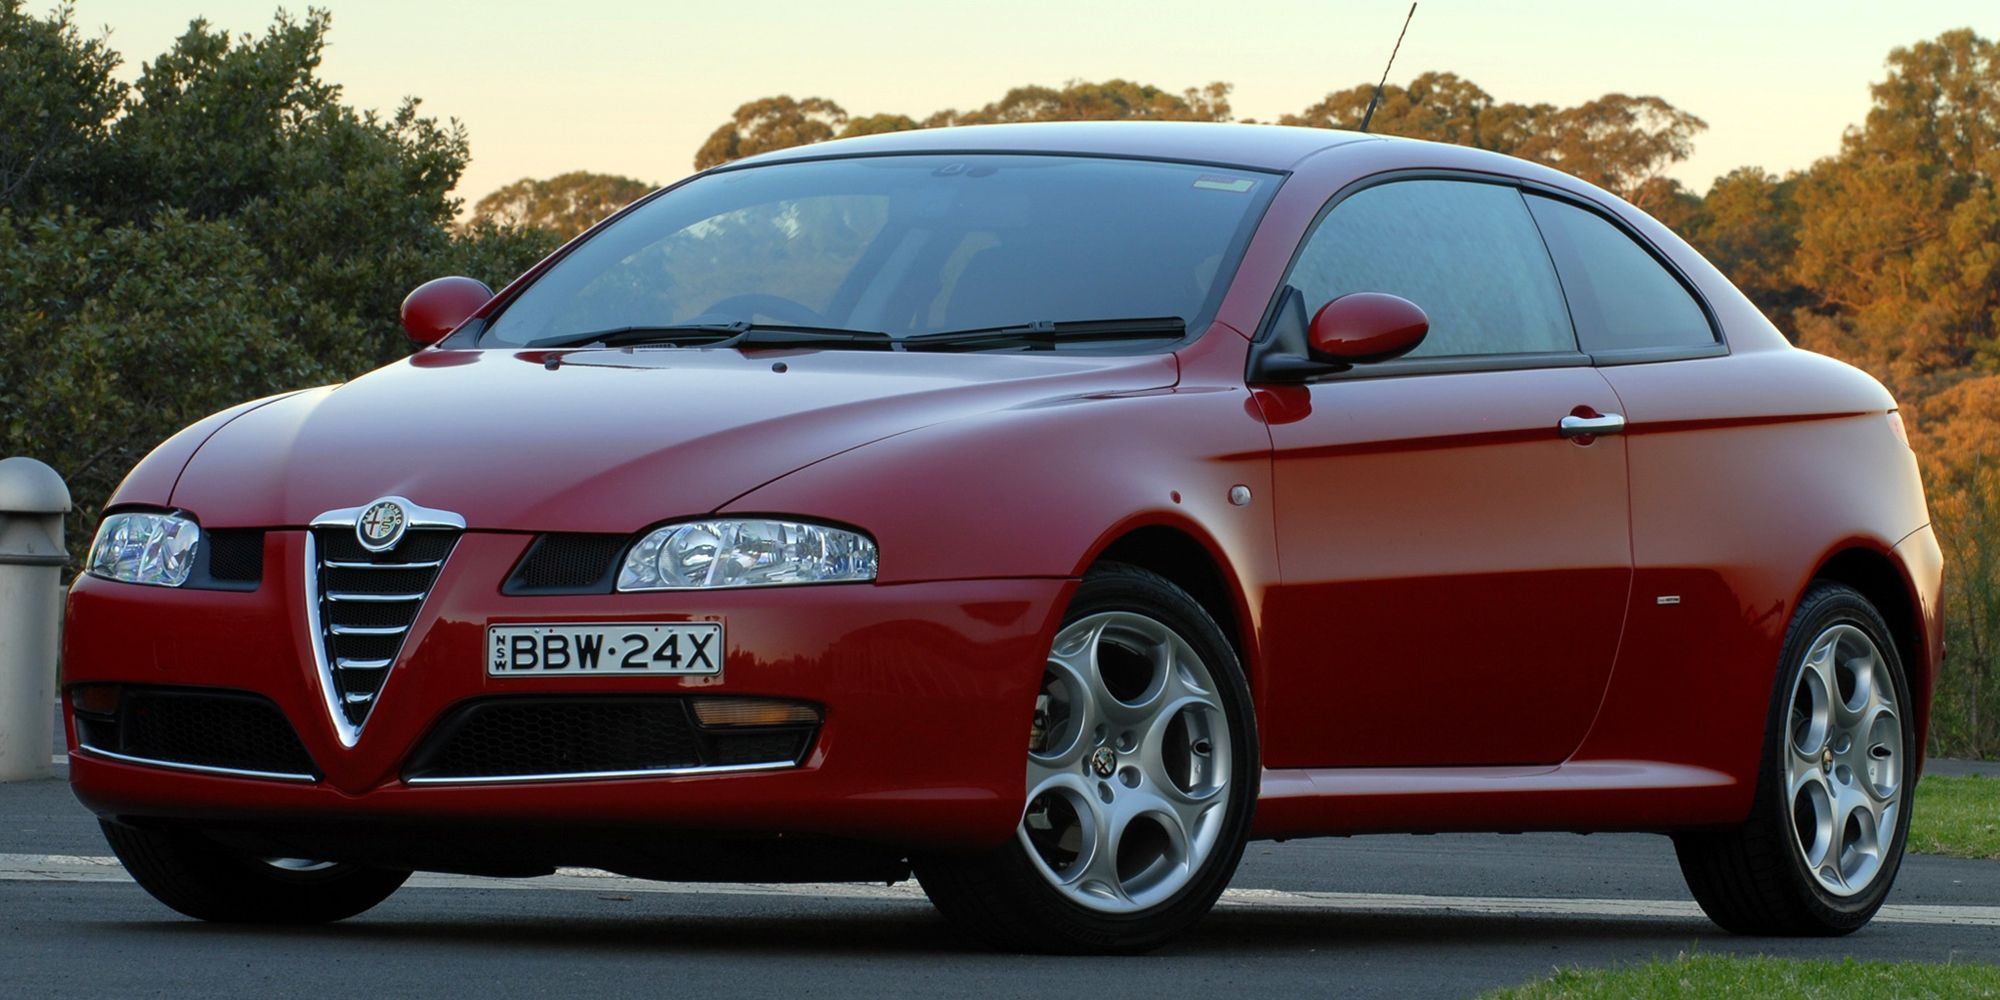 Front 3/4 view of a red Alfa GT